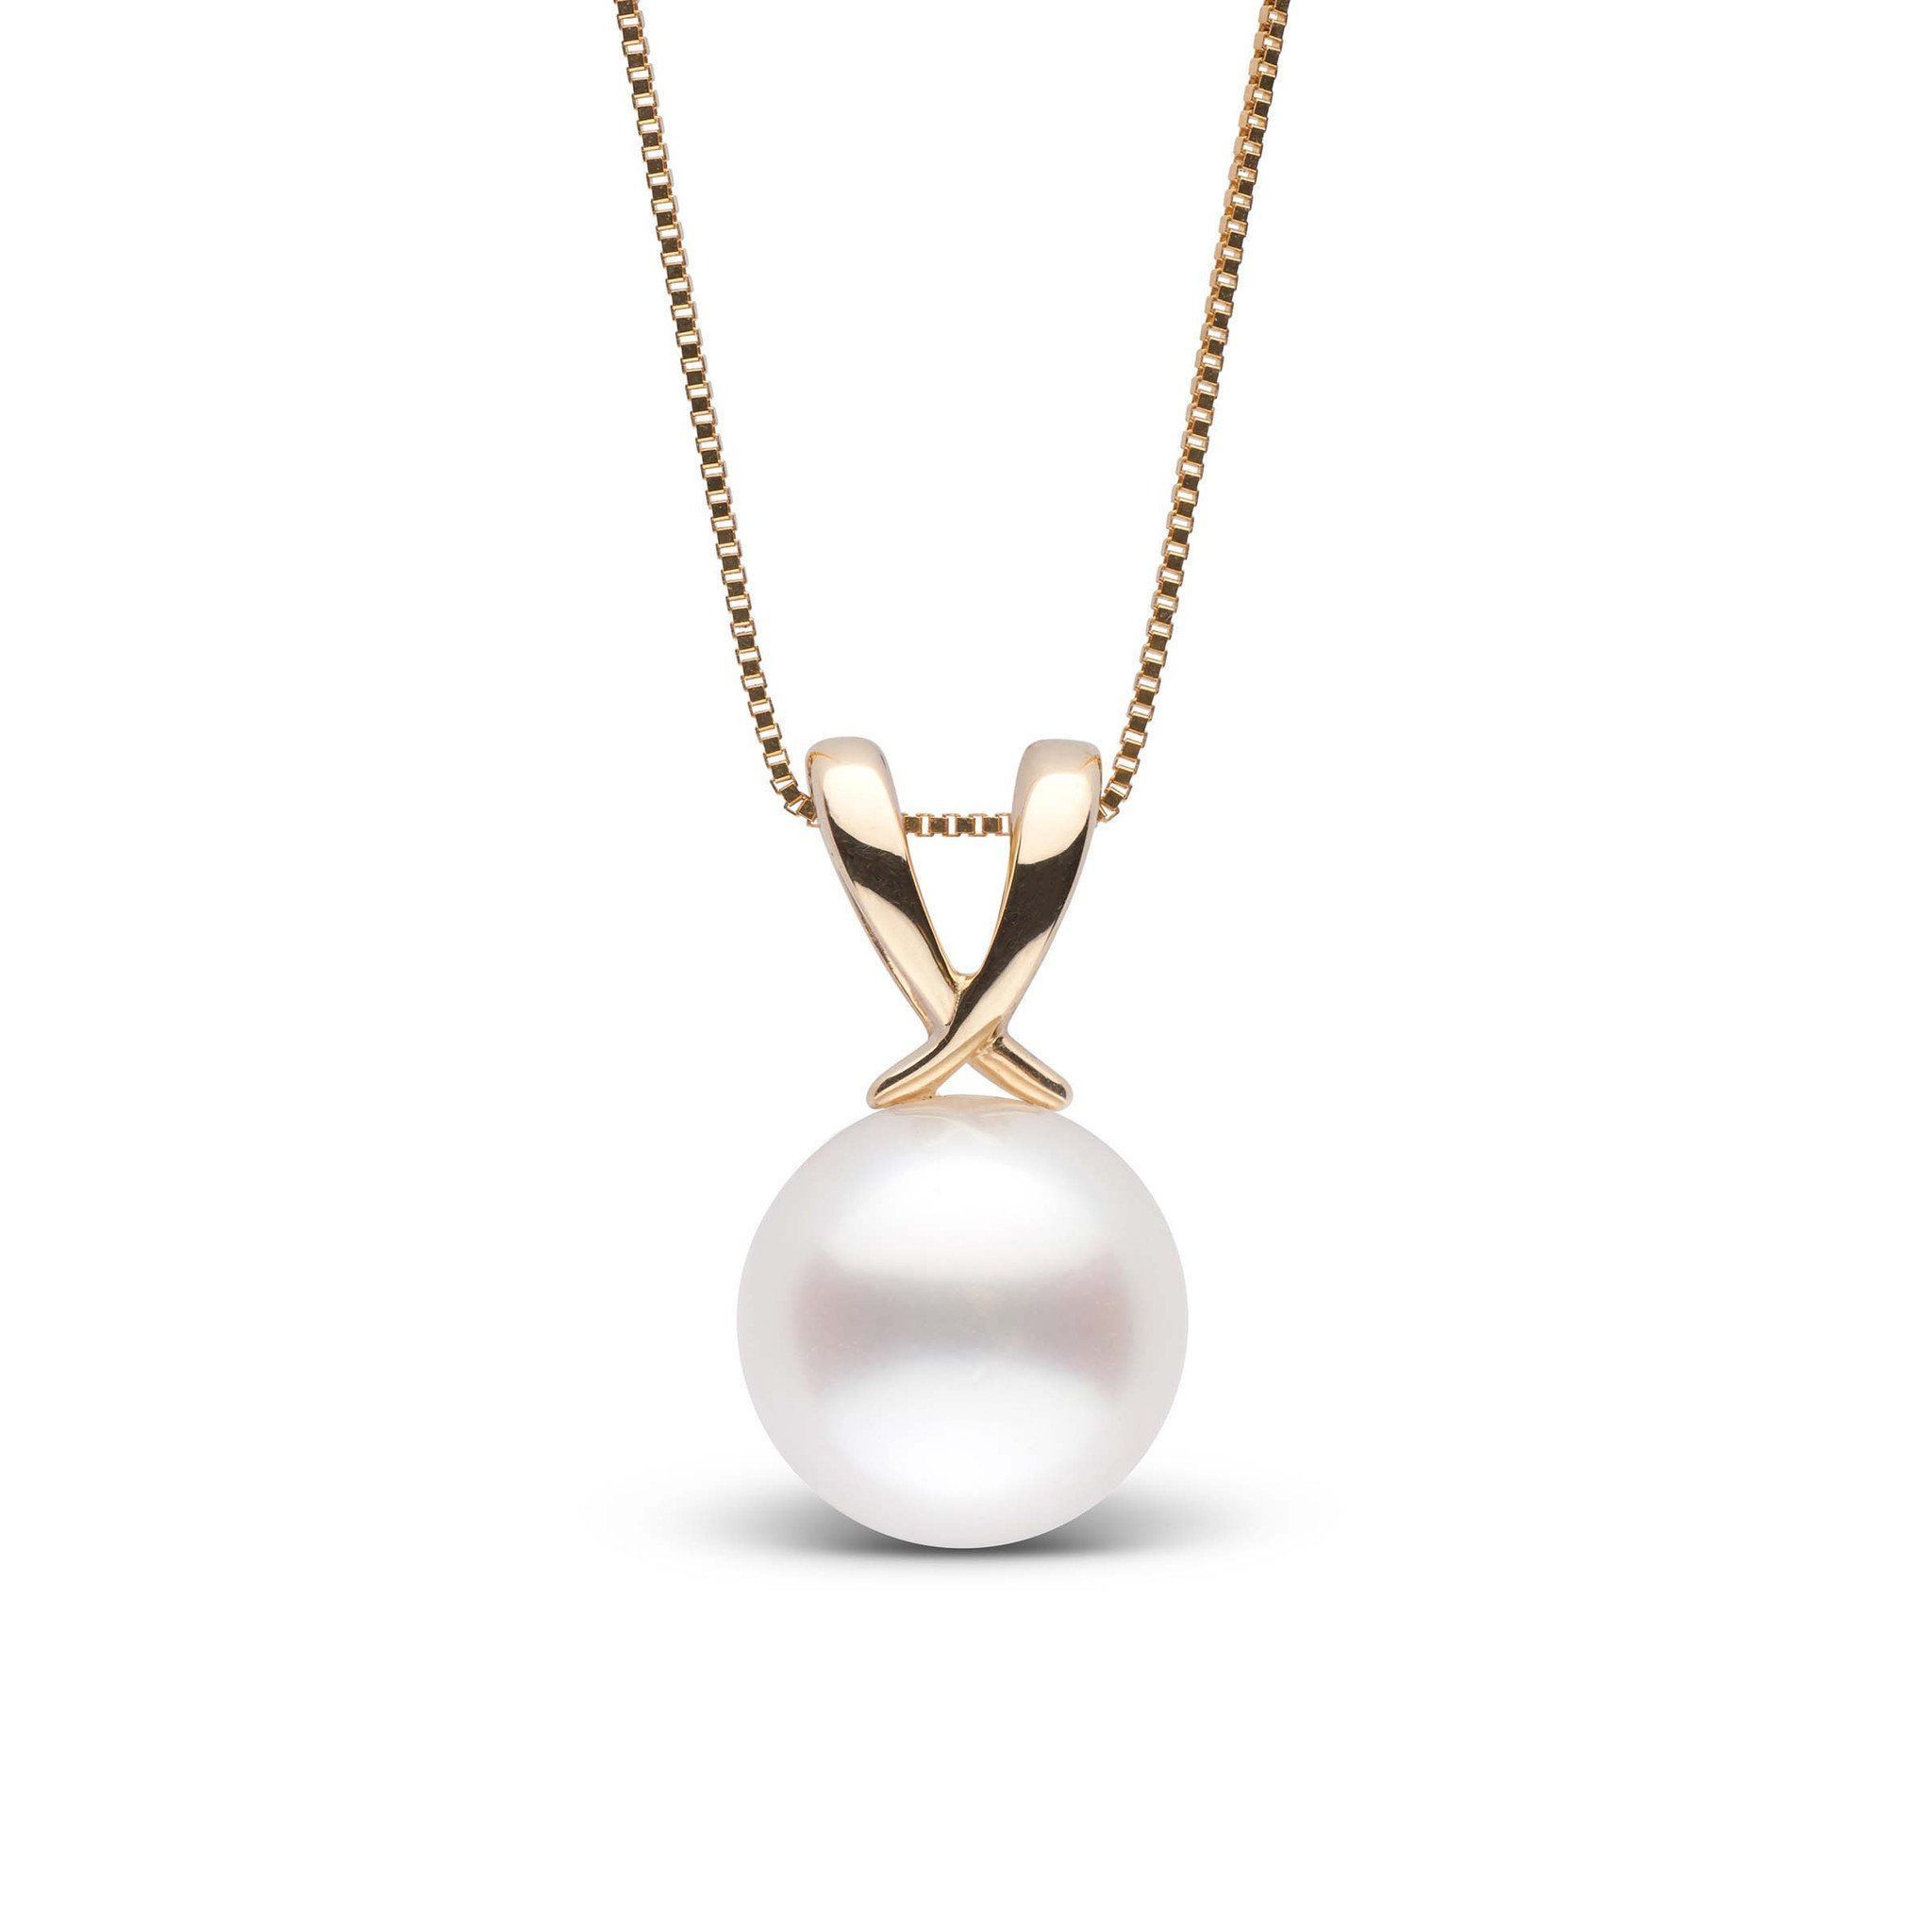 Ribbon Collection 9.0-10.0 mm White South Sea Pearl Pendant